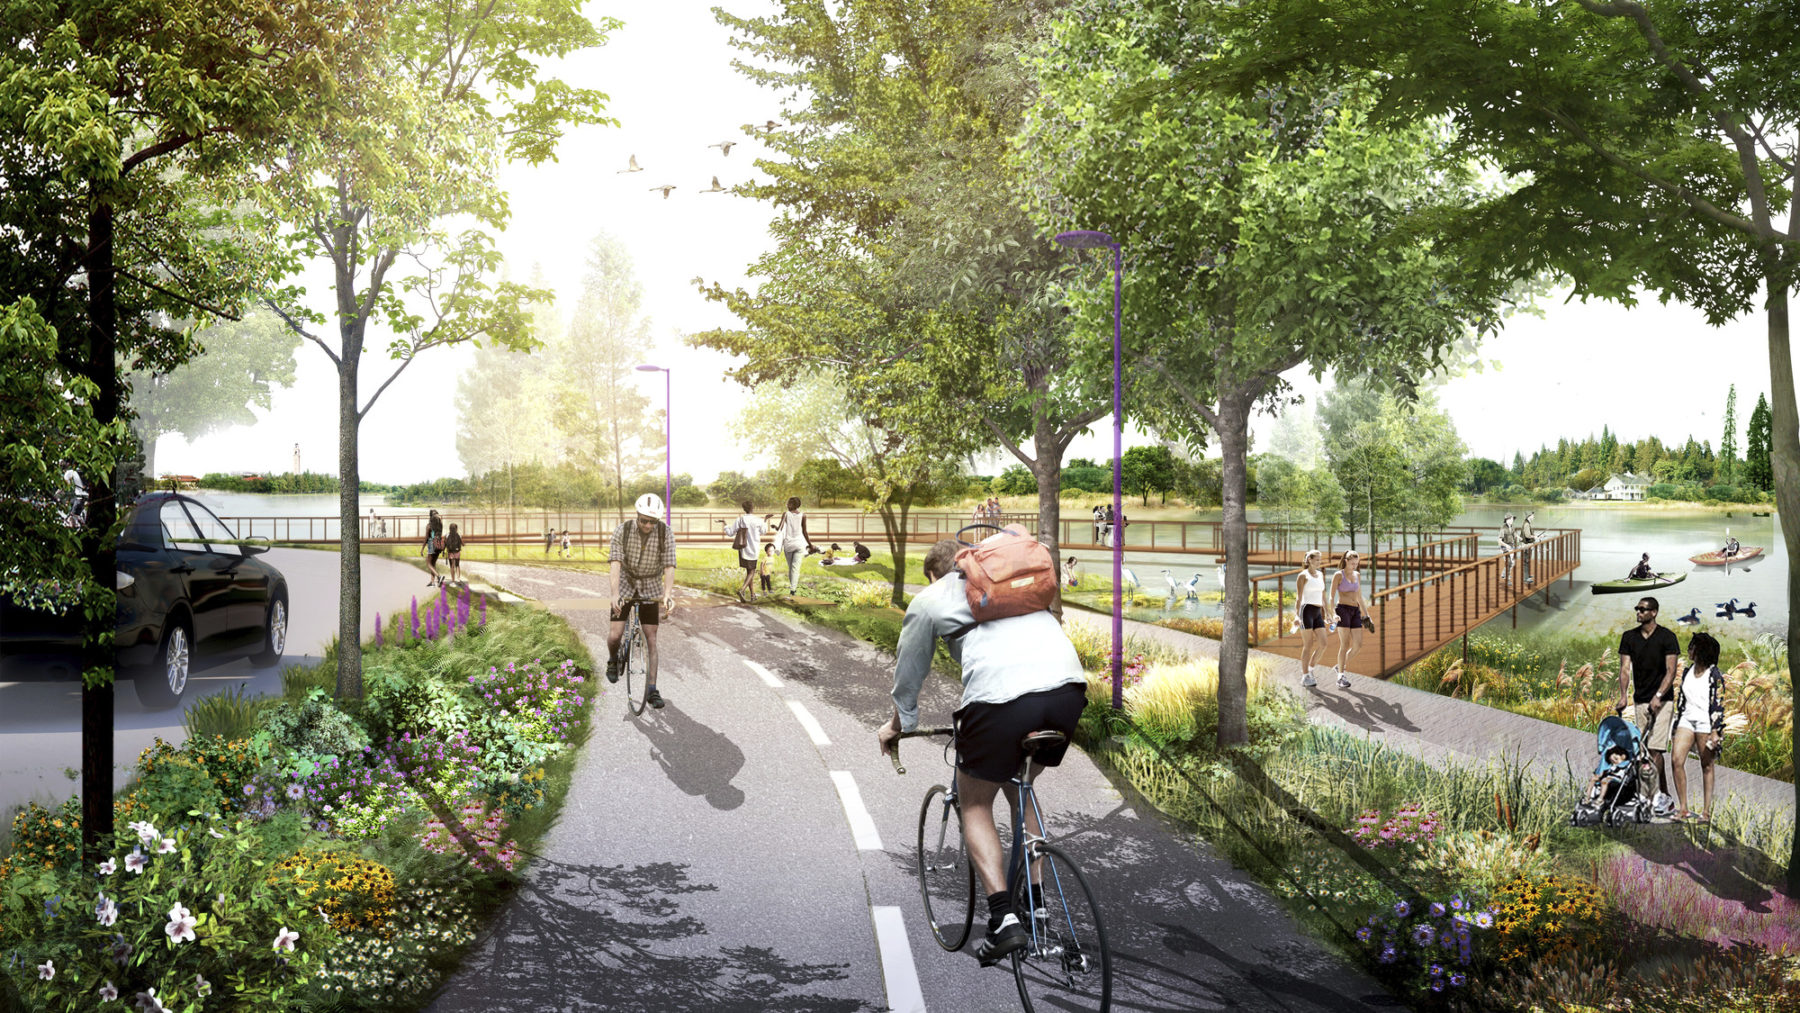 rendering of site vision with a bike path along the waterfront. people pike and walk along designated paths